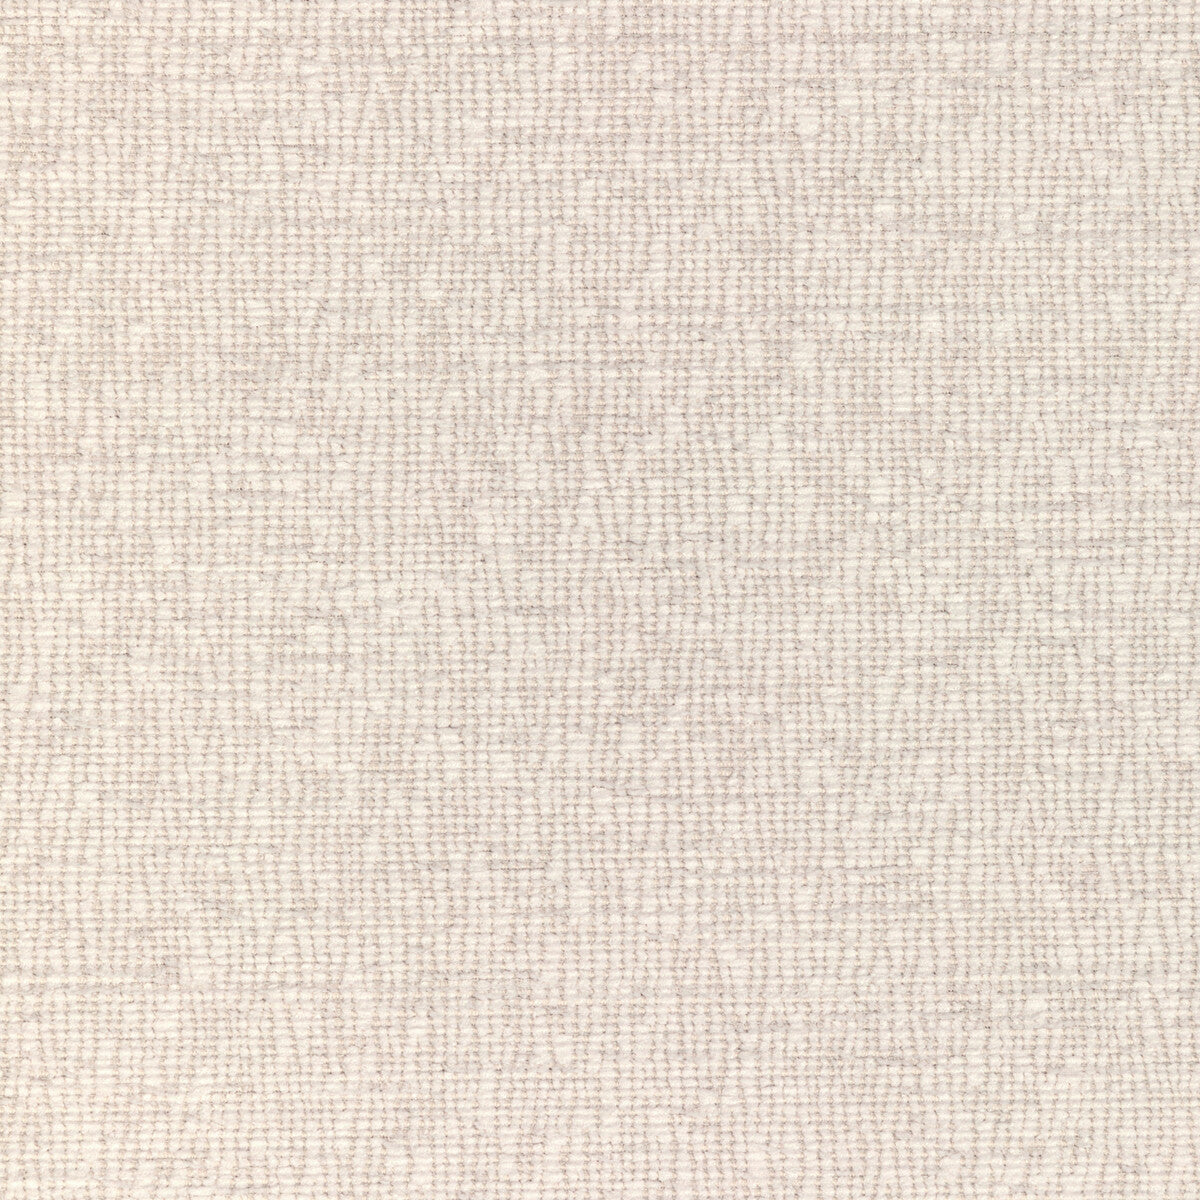 Kravet Couture fabric in 36654-1 color - pattern 36654.1.0 - by Kravet Couture in the Mabley Handler collection